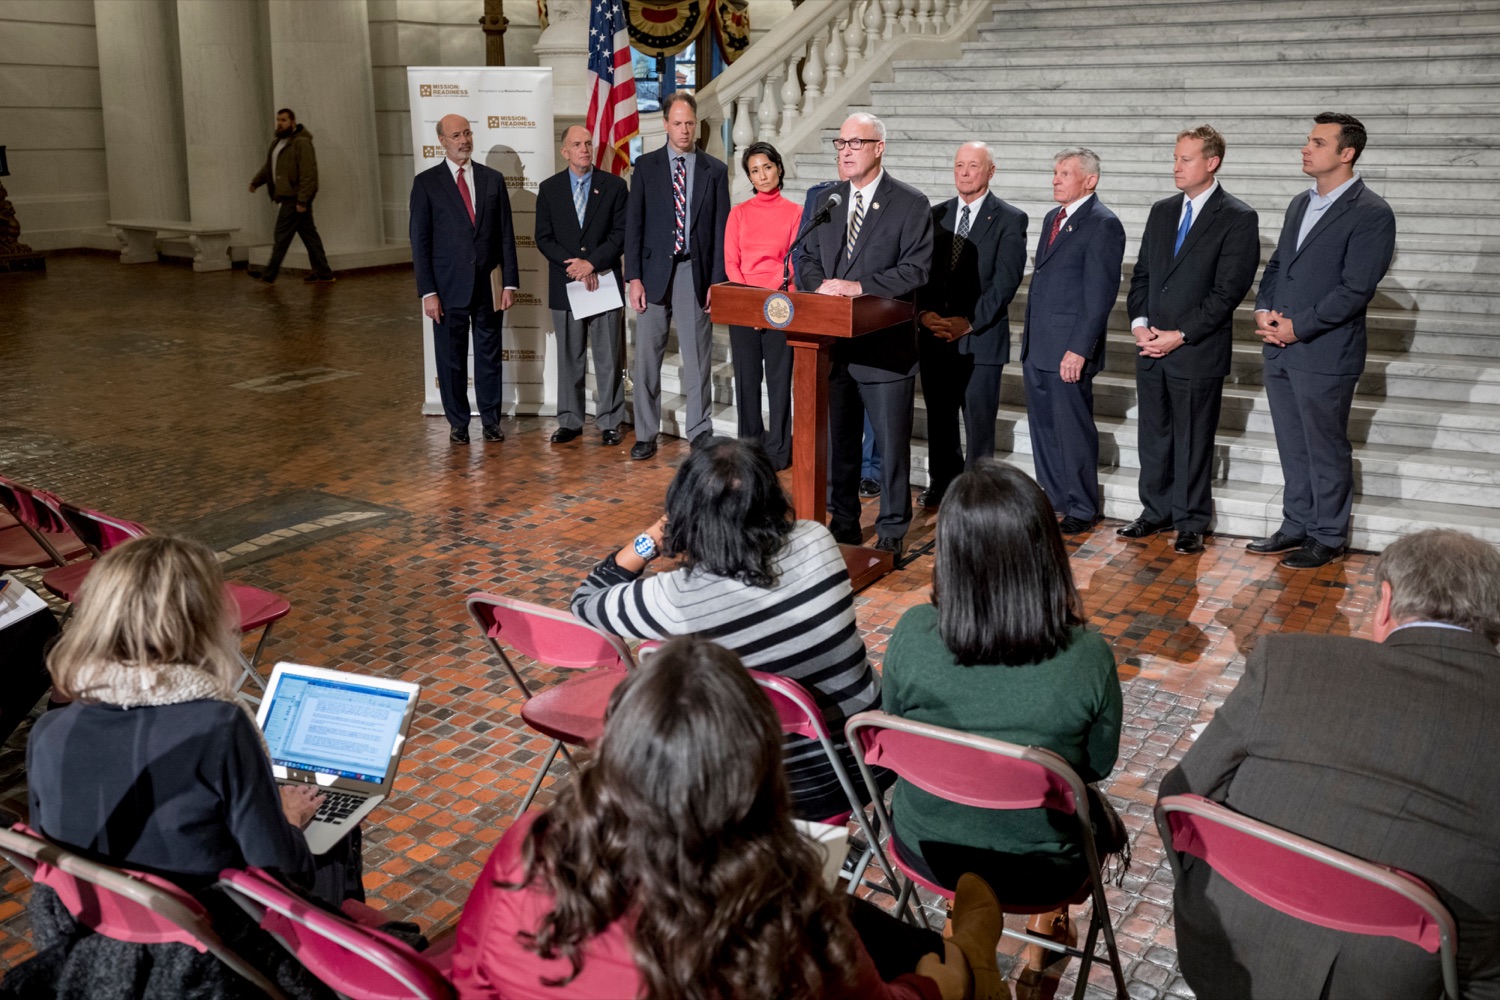 State Rep. Tom Murt speaks during a press conference outlining how competition for qualified individuals among all employment sectors affects military recruiting efforts and warrants greater investment in our next generation inside the Capitol Rotunda on Tuesday, November 12, 2019.<br><a href="https://filesource.amperwave.net/commonwealthofpa/photo/17588_GOV_Mission_Readiness_NK_021.JPG" target="_blank">⇣ Download Photo</a>